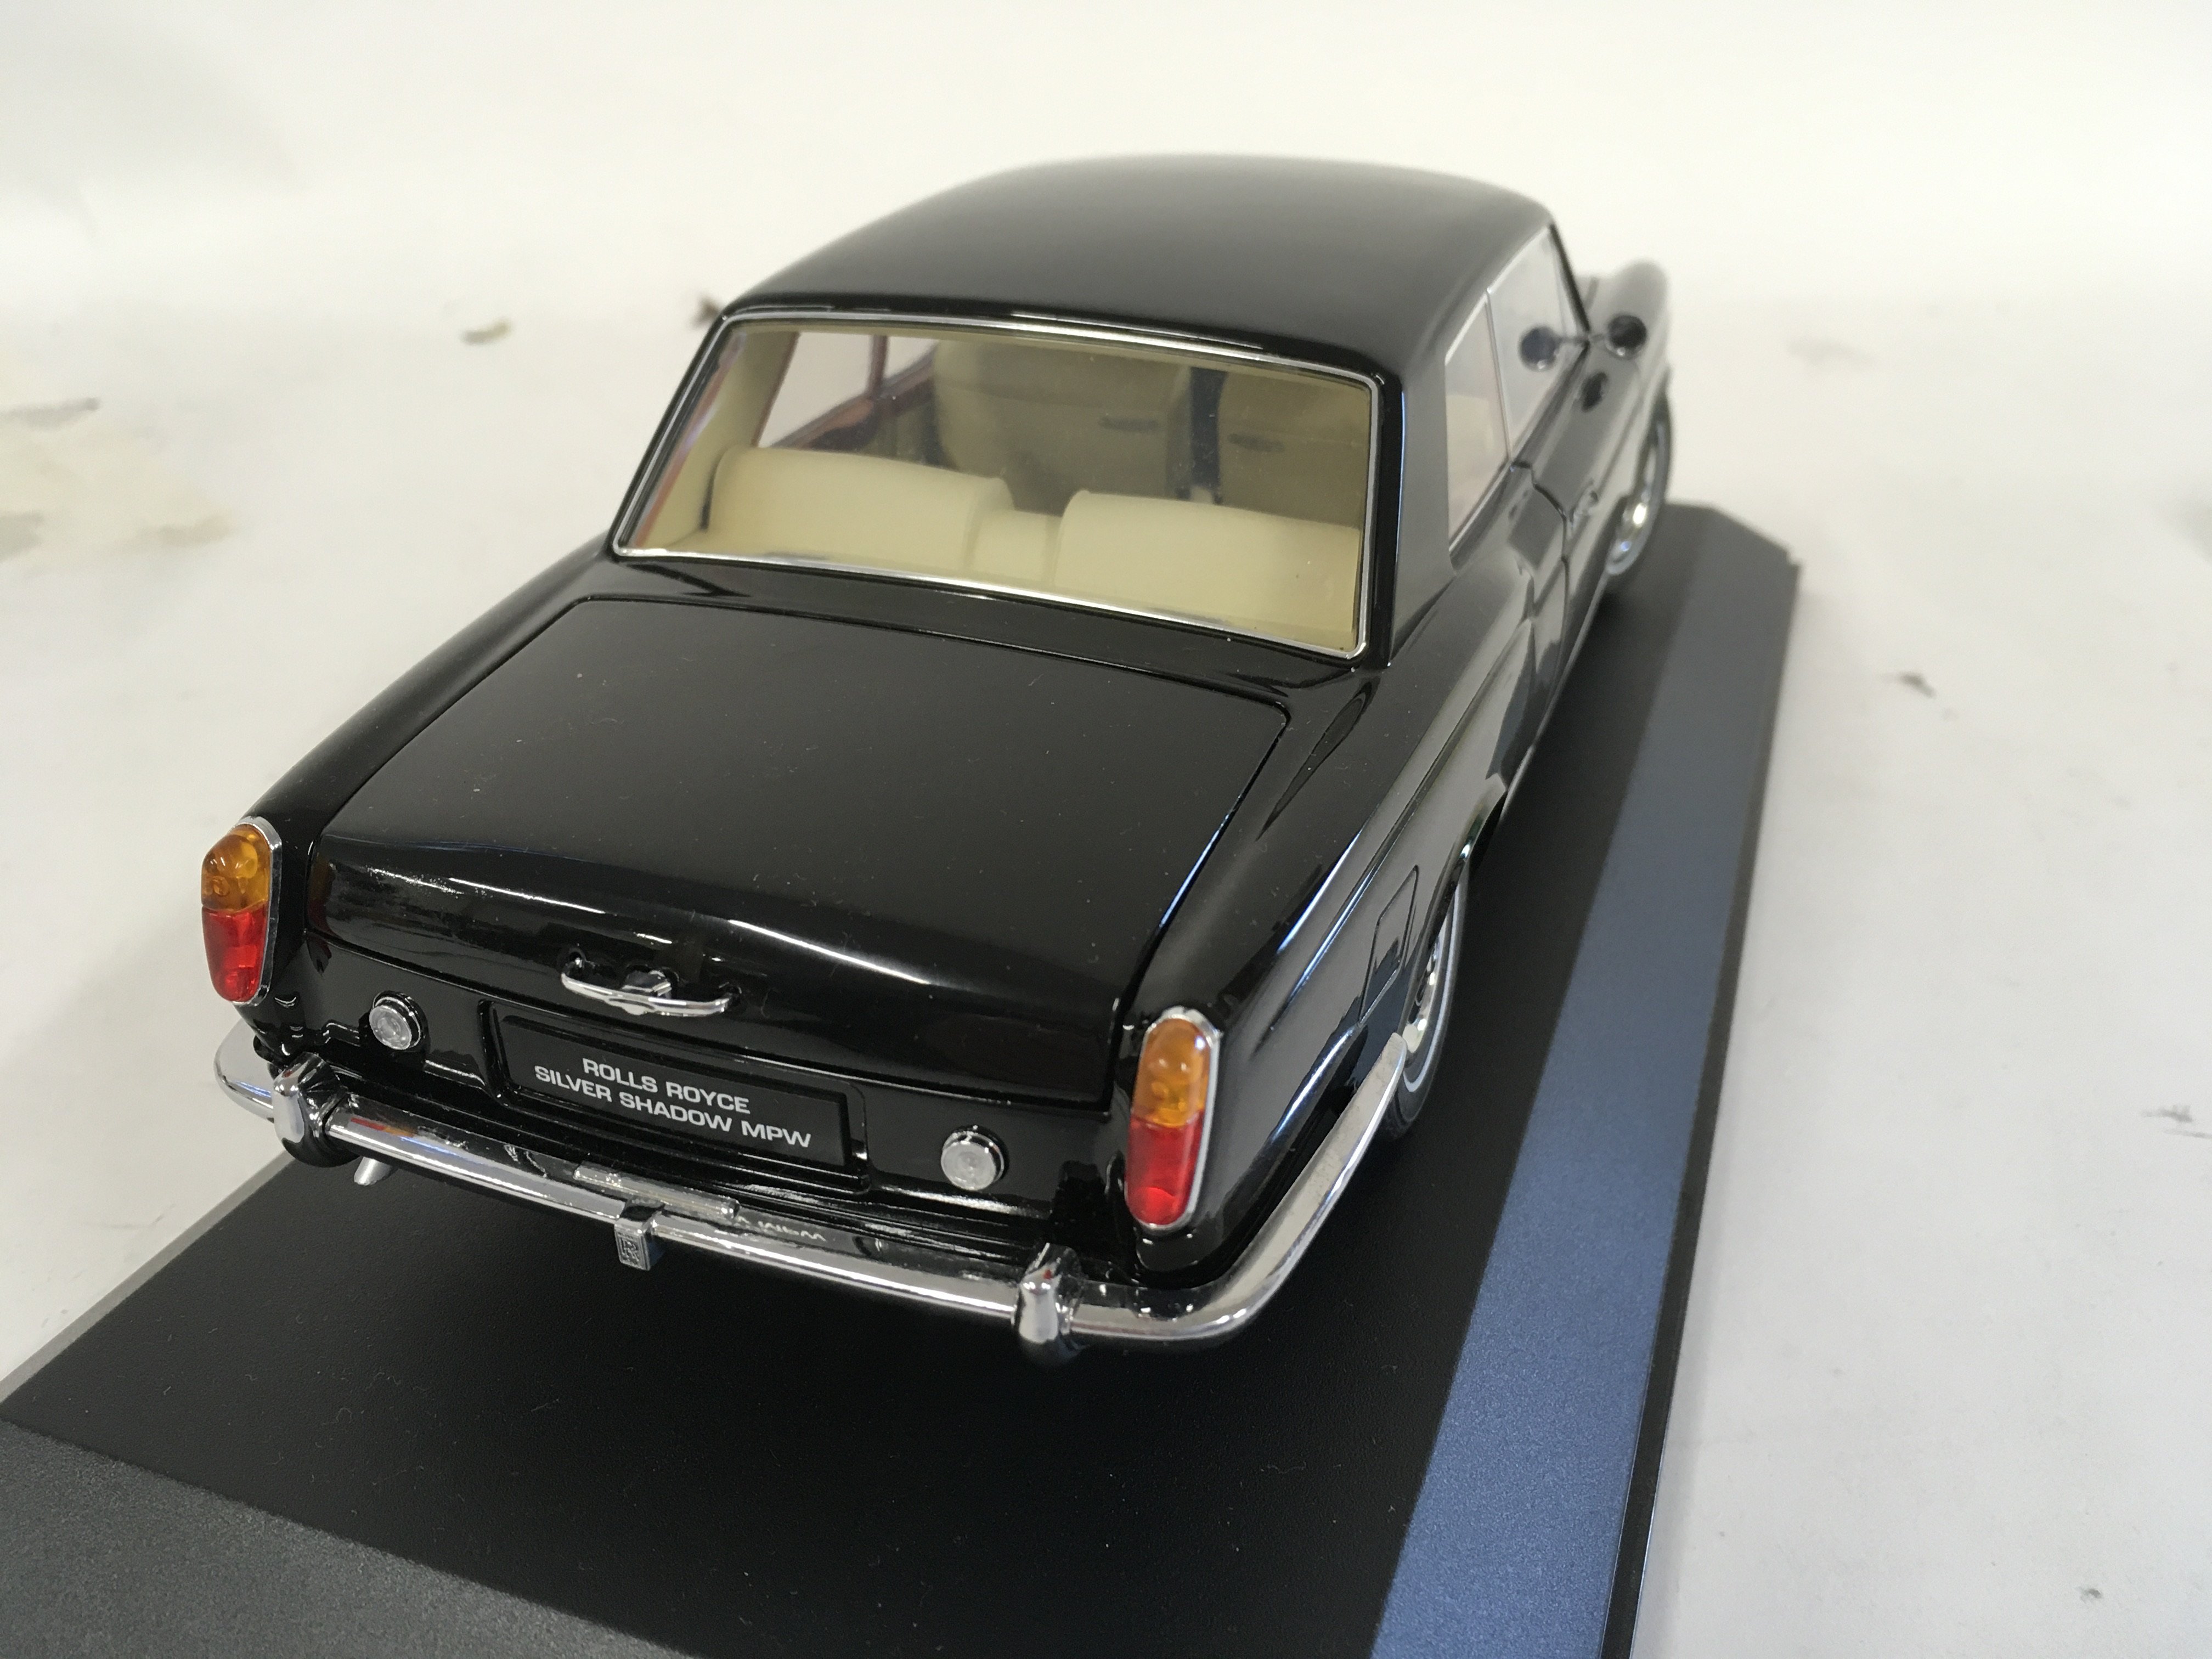 Three precision model cars by Franklin Mint both in presentation cases. Cars are 2 x RollsRoyce - Image 2 of 10